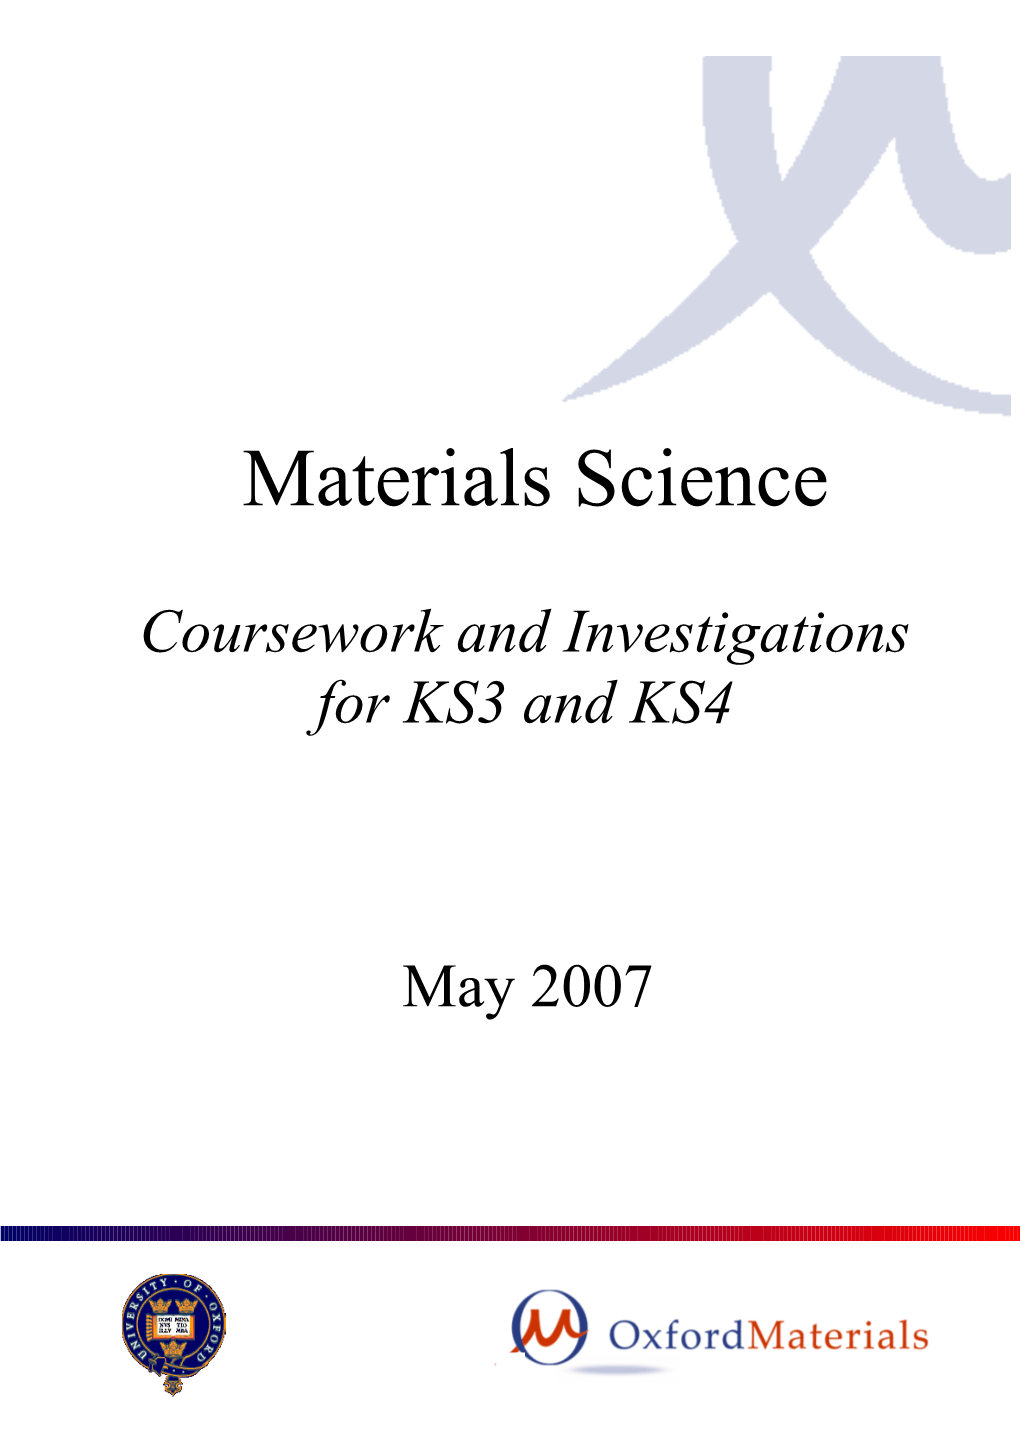 Coursework and Investigations for KS3 and KS4